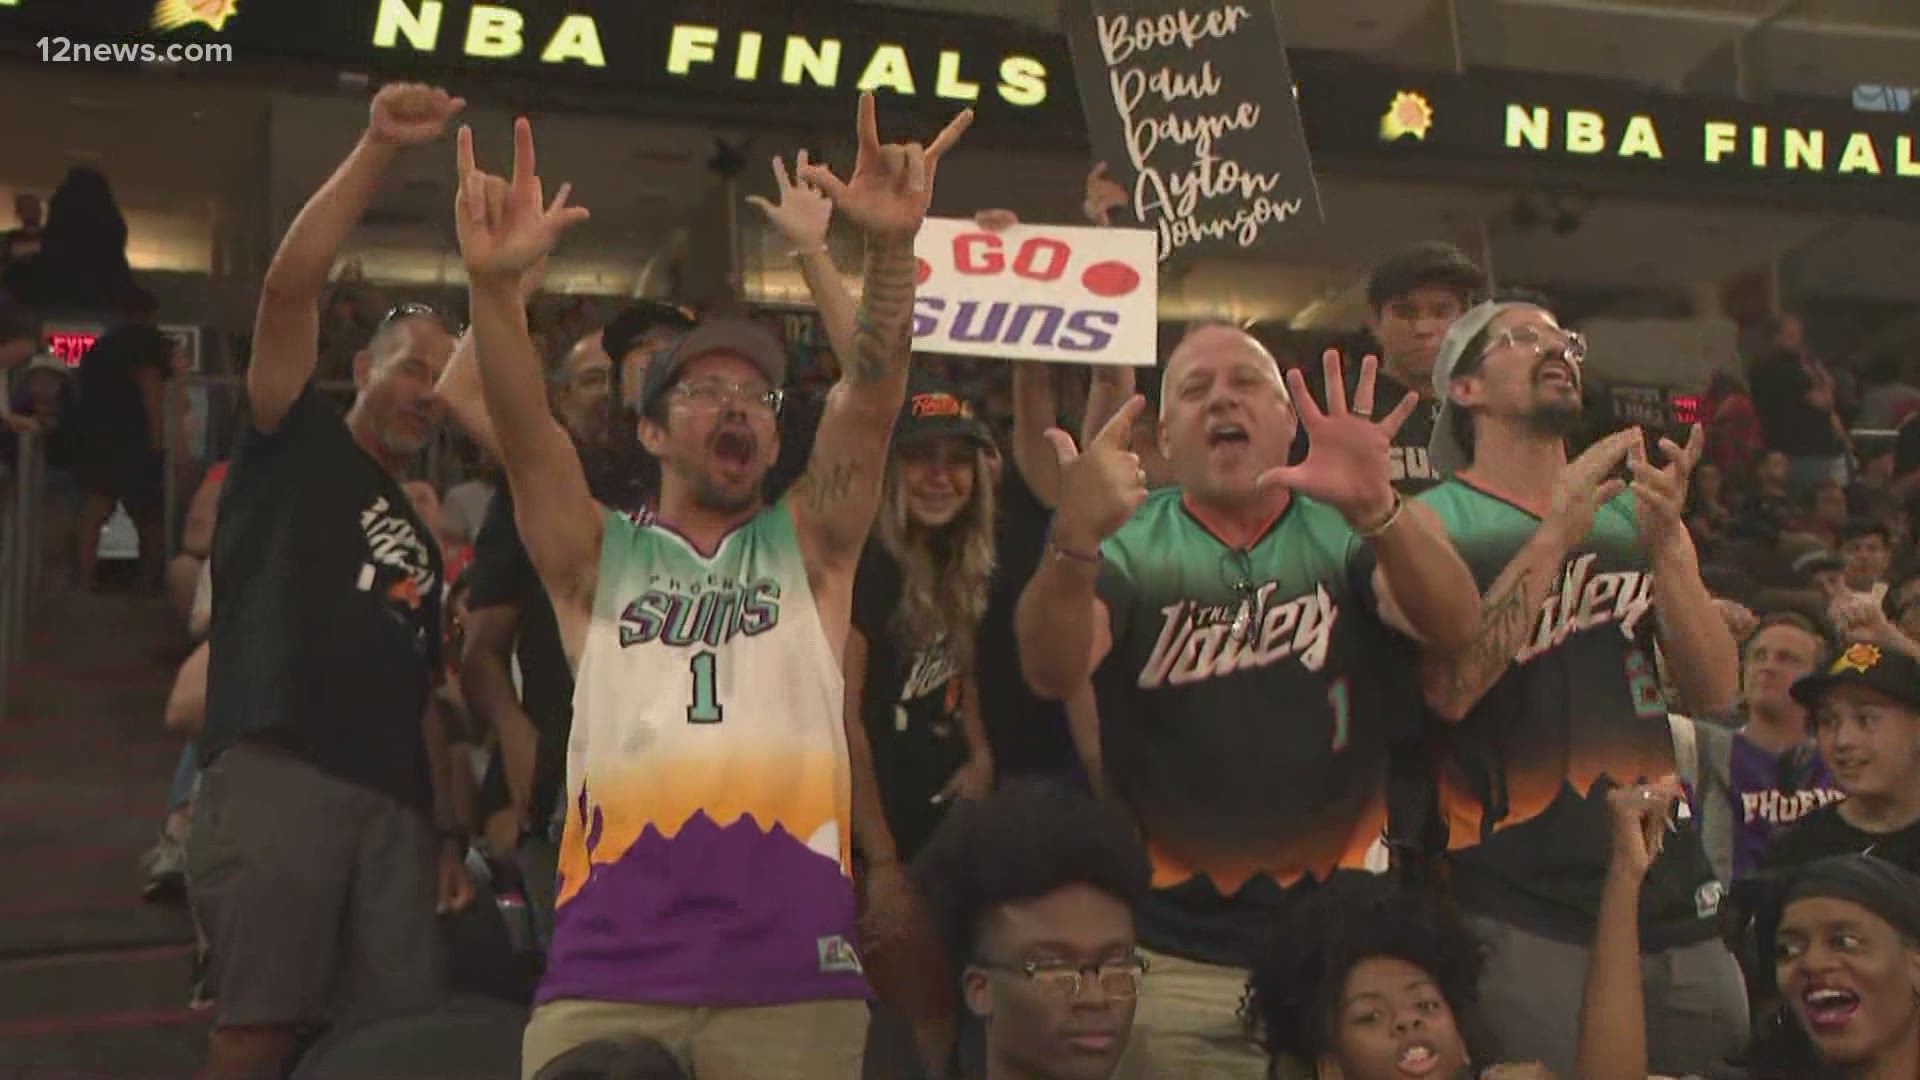 It is do or die for the Phoenix Suns as they head into Game 6 of the NBA Finals against the Milwaukee Bucks. Suns fans are Rallying the Valley to cheer on the team!